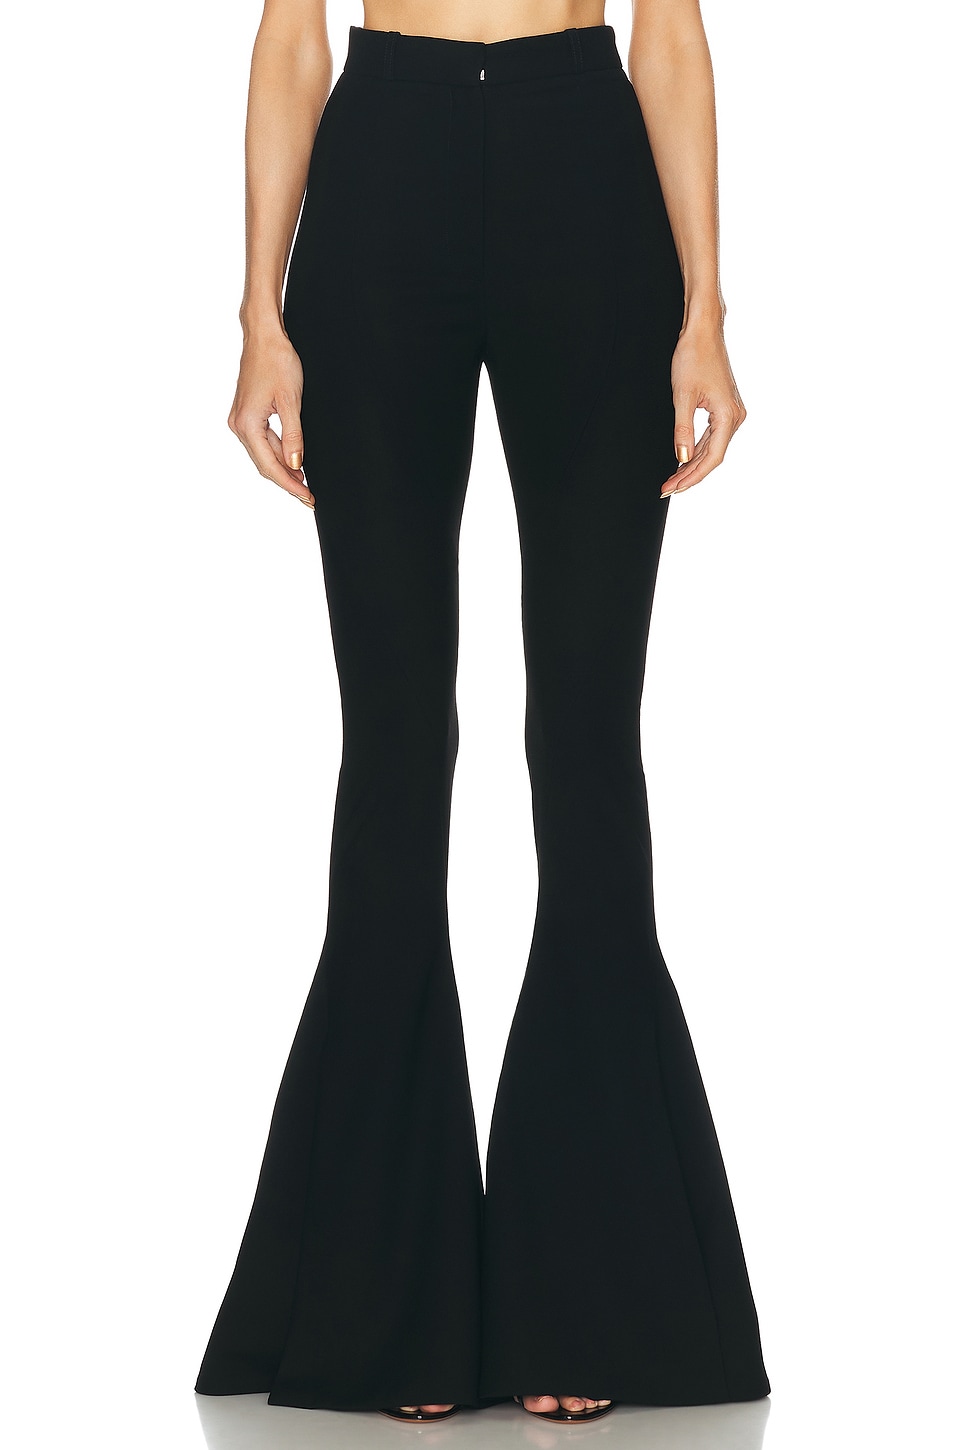 Image 1 of MONOT Ava Spiral Trouser Pant in Black